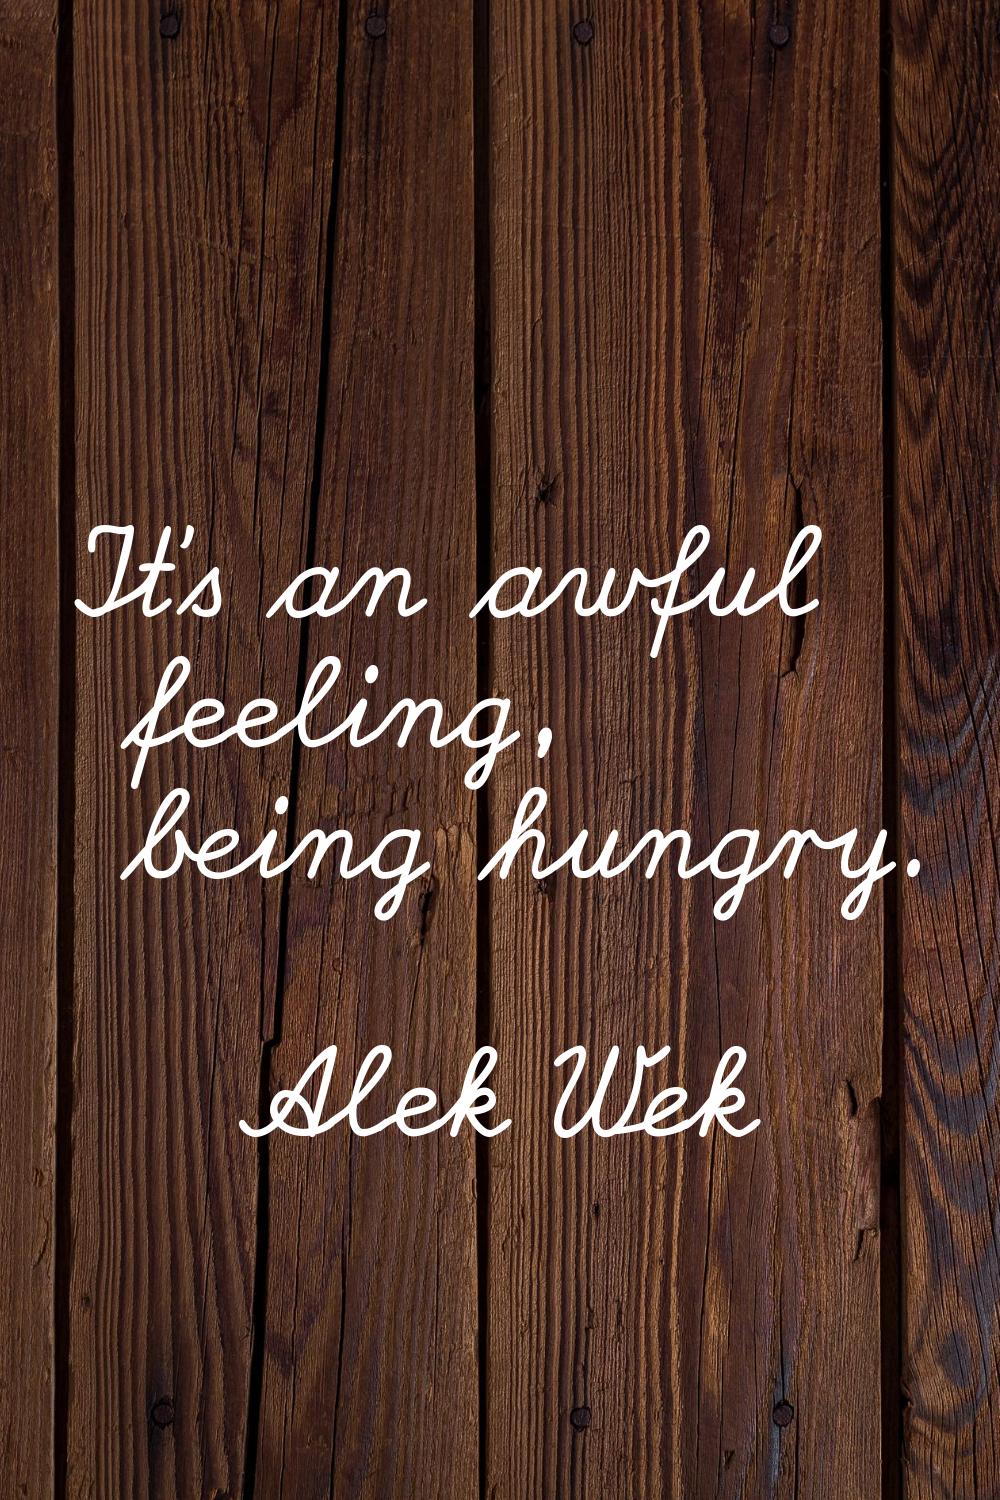 It's an awful feeling, being hungry.